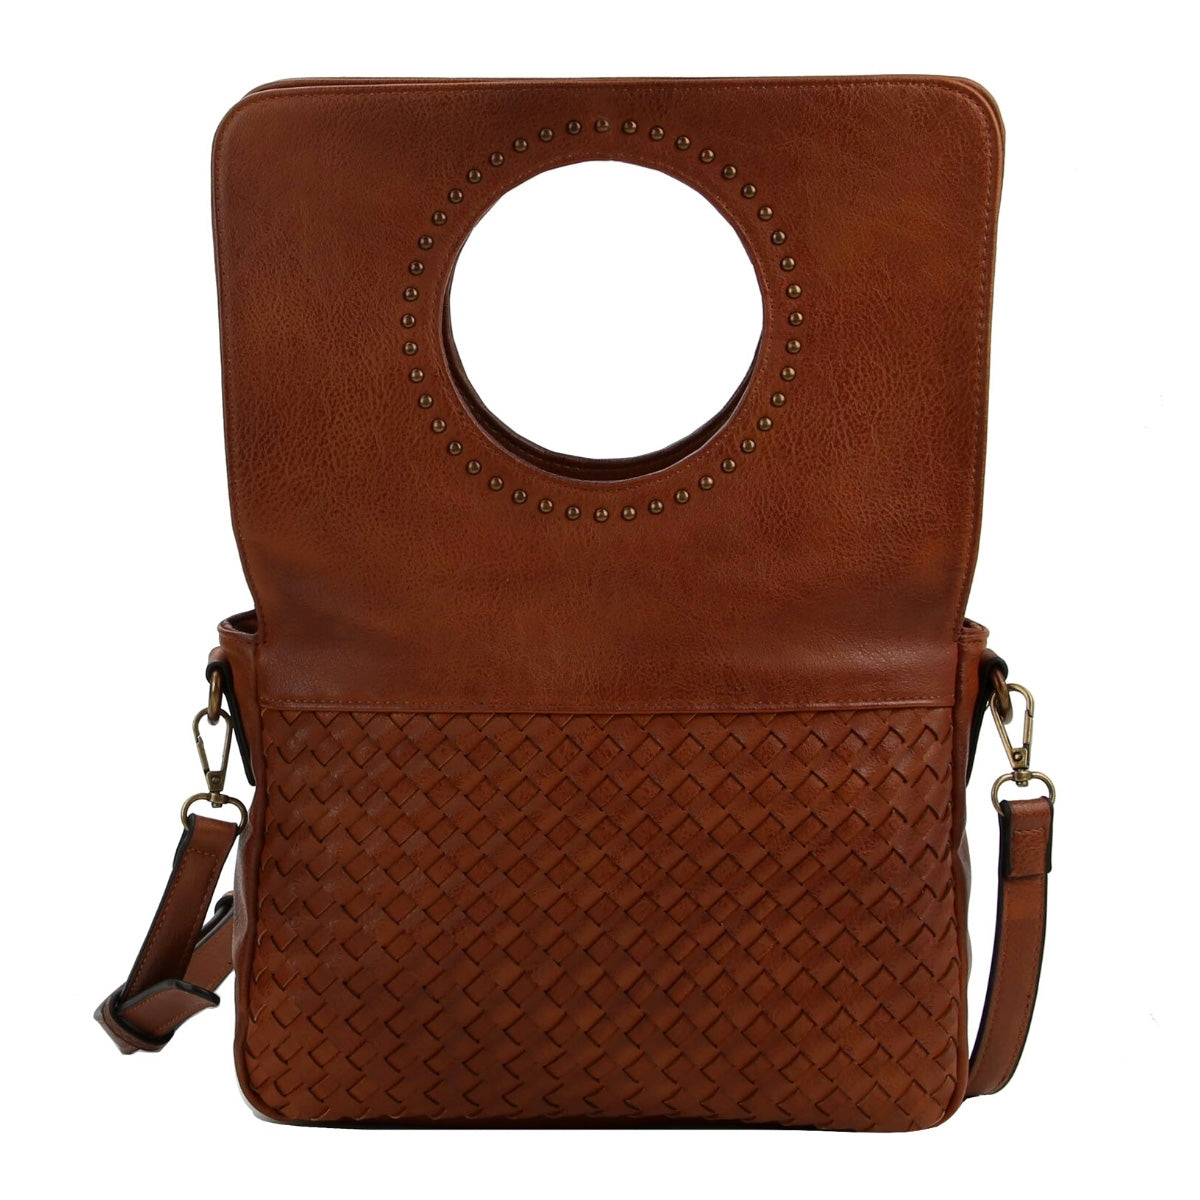 Brown Leather Woven Flap Crossbody